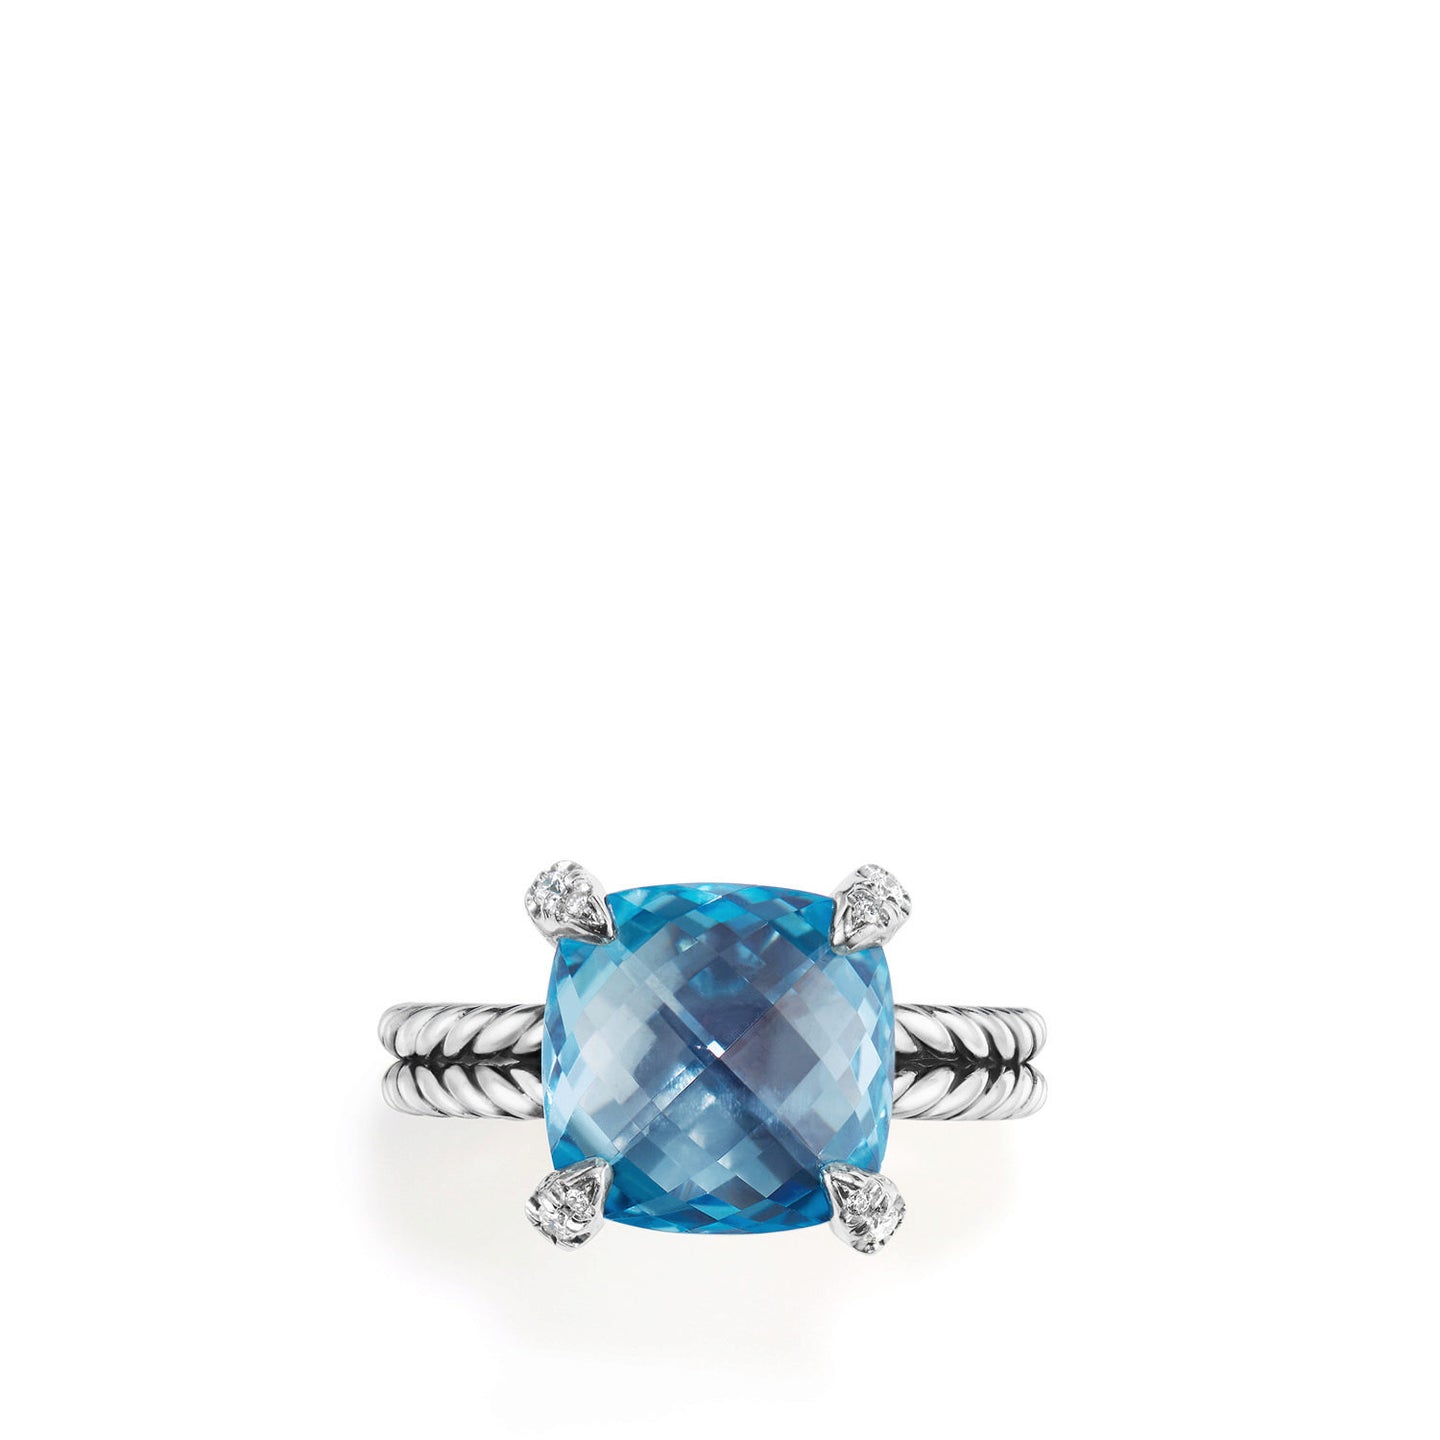 Châtelaine® Ring with Blue Topaz and Diamonds, 11mm, Size 6